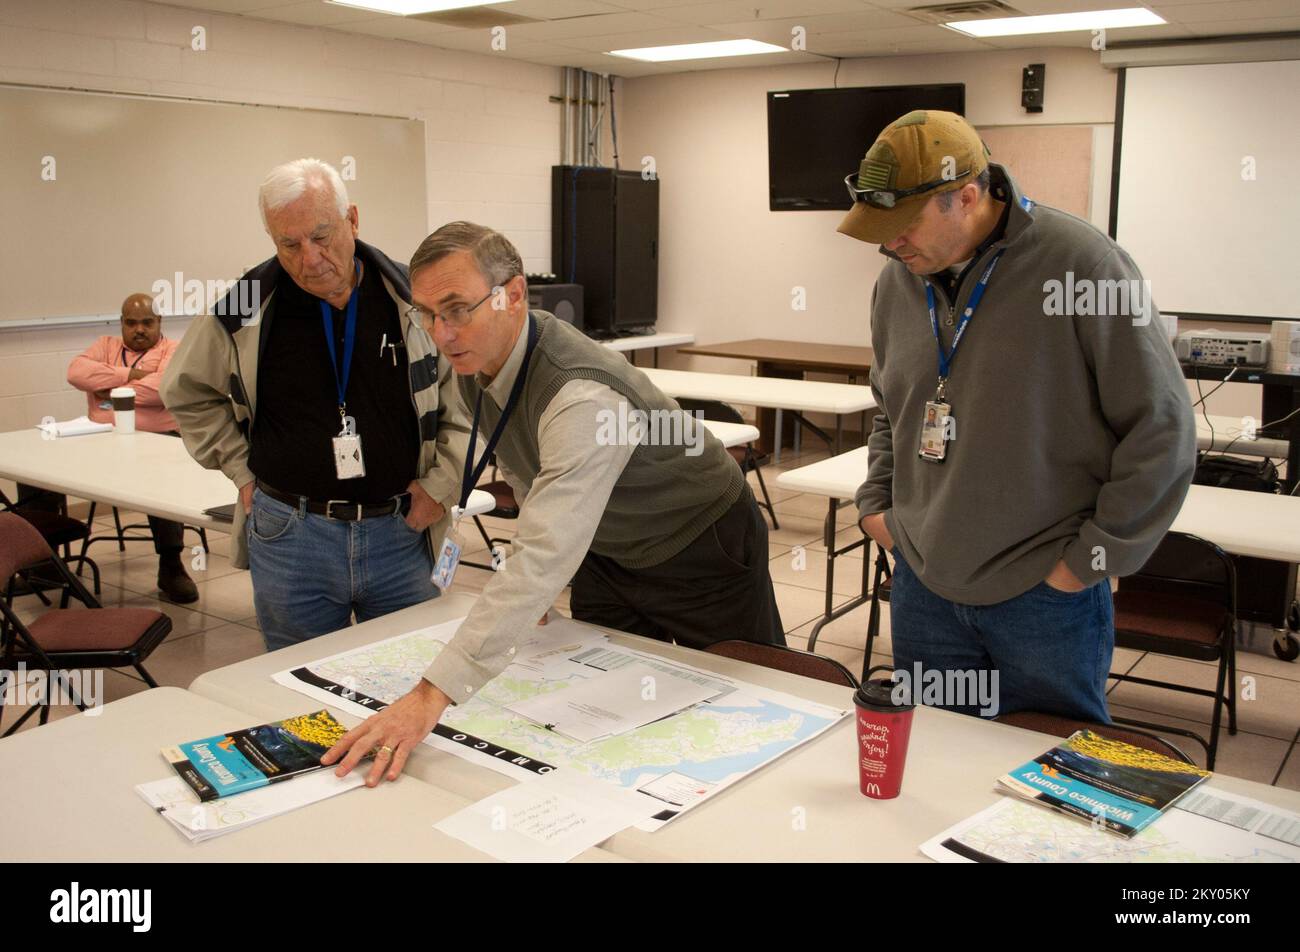 Salisbury, Md., Nov. 14, 2012   David Shipley, (center) director of the Wicomico County Emergency Services in Salisbury, MD, goes over damage reports from Hurricane Sandy with Duane Woodruff (left) ,Small Business Administration, and James Taylor (right), FEMA at the emergency services offices. FEMA and county officials were assessing the effects from Hurricane Sandy. Maryland Hurricane Sandy. Photographs Relating to Disasters and Emergency Management Programs, Activities, and Officials Stock Photo